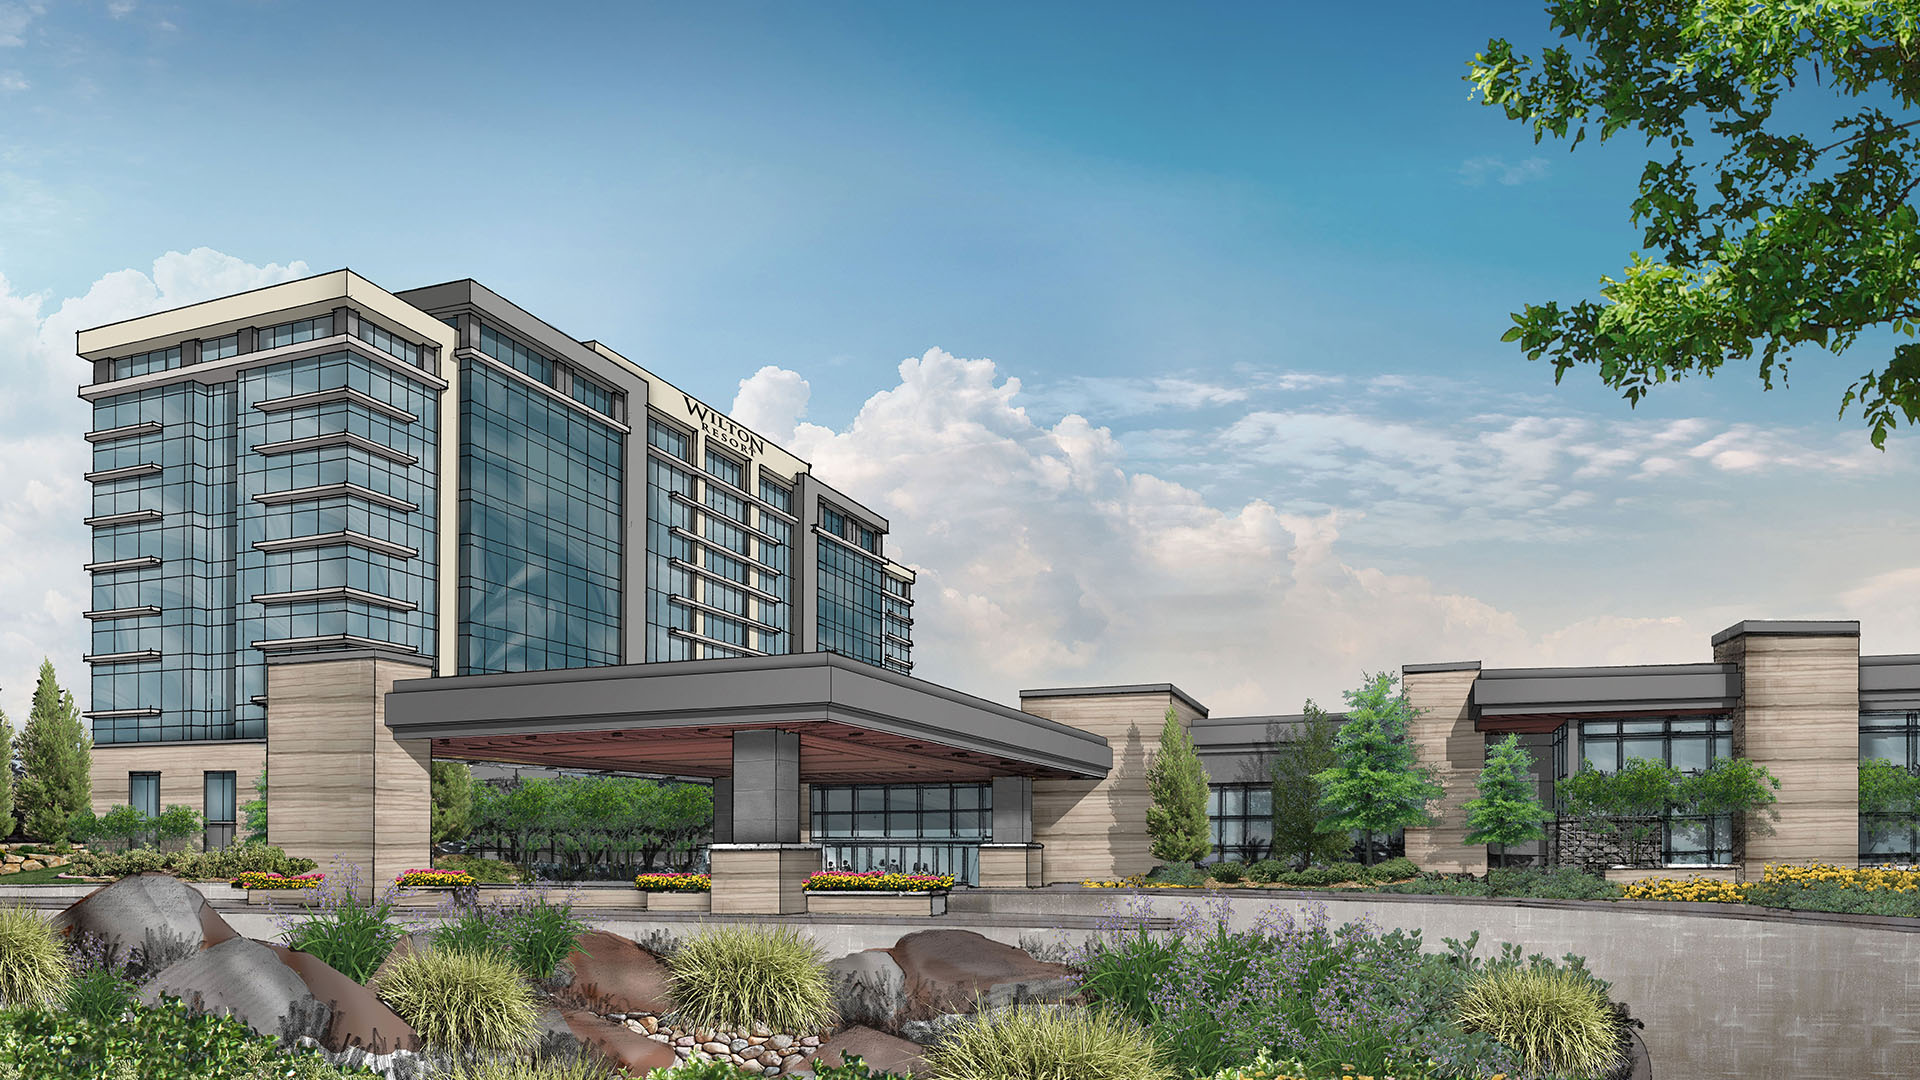 Wilton Rancheria secures approval of gaming management agreement